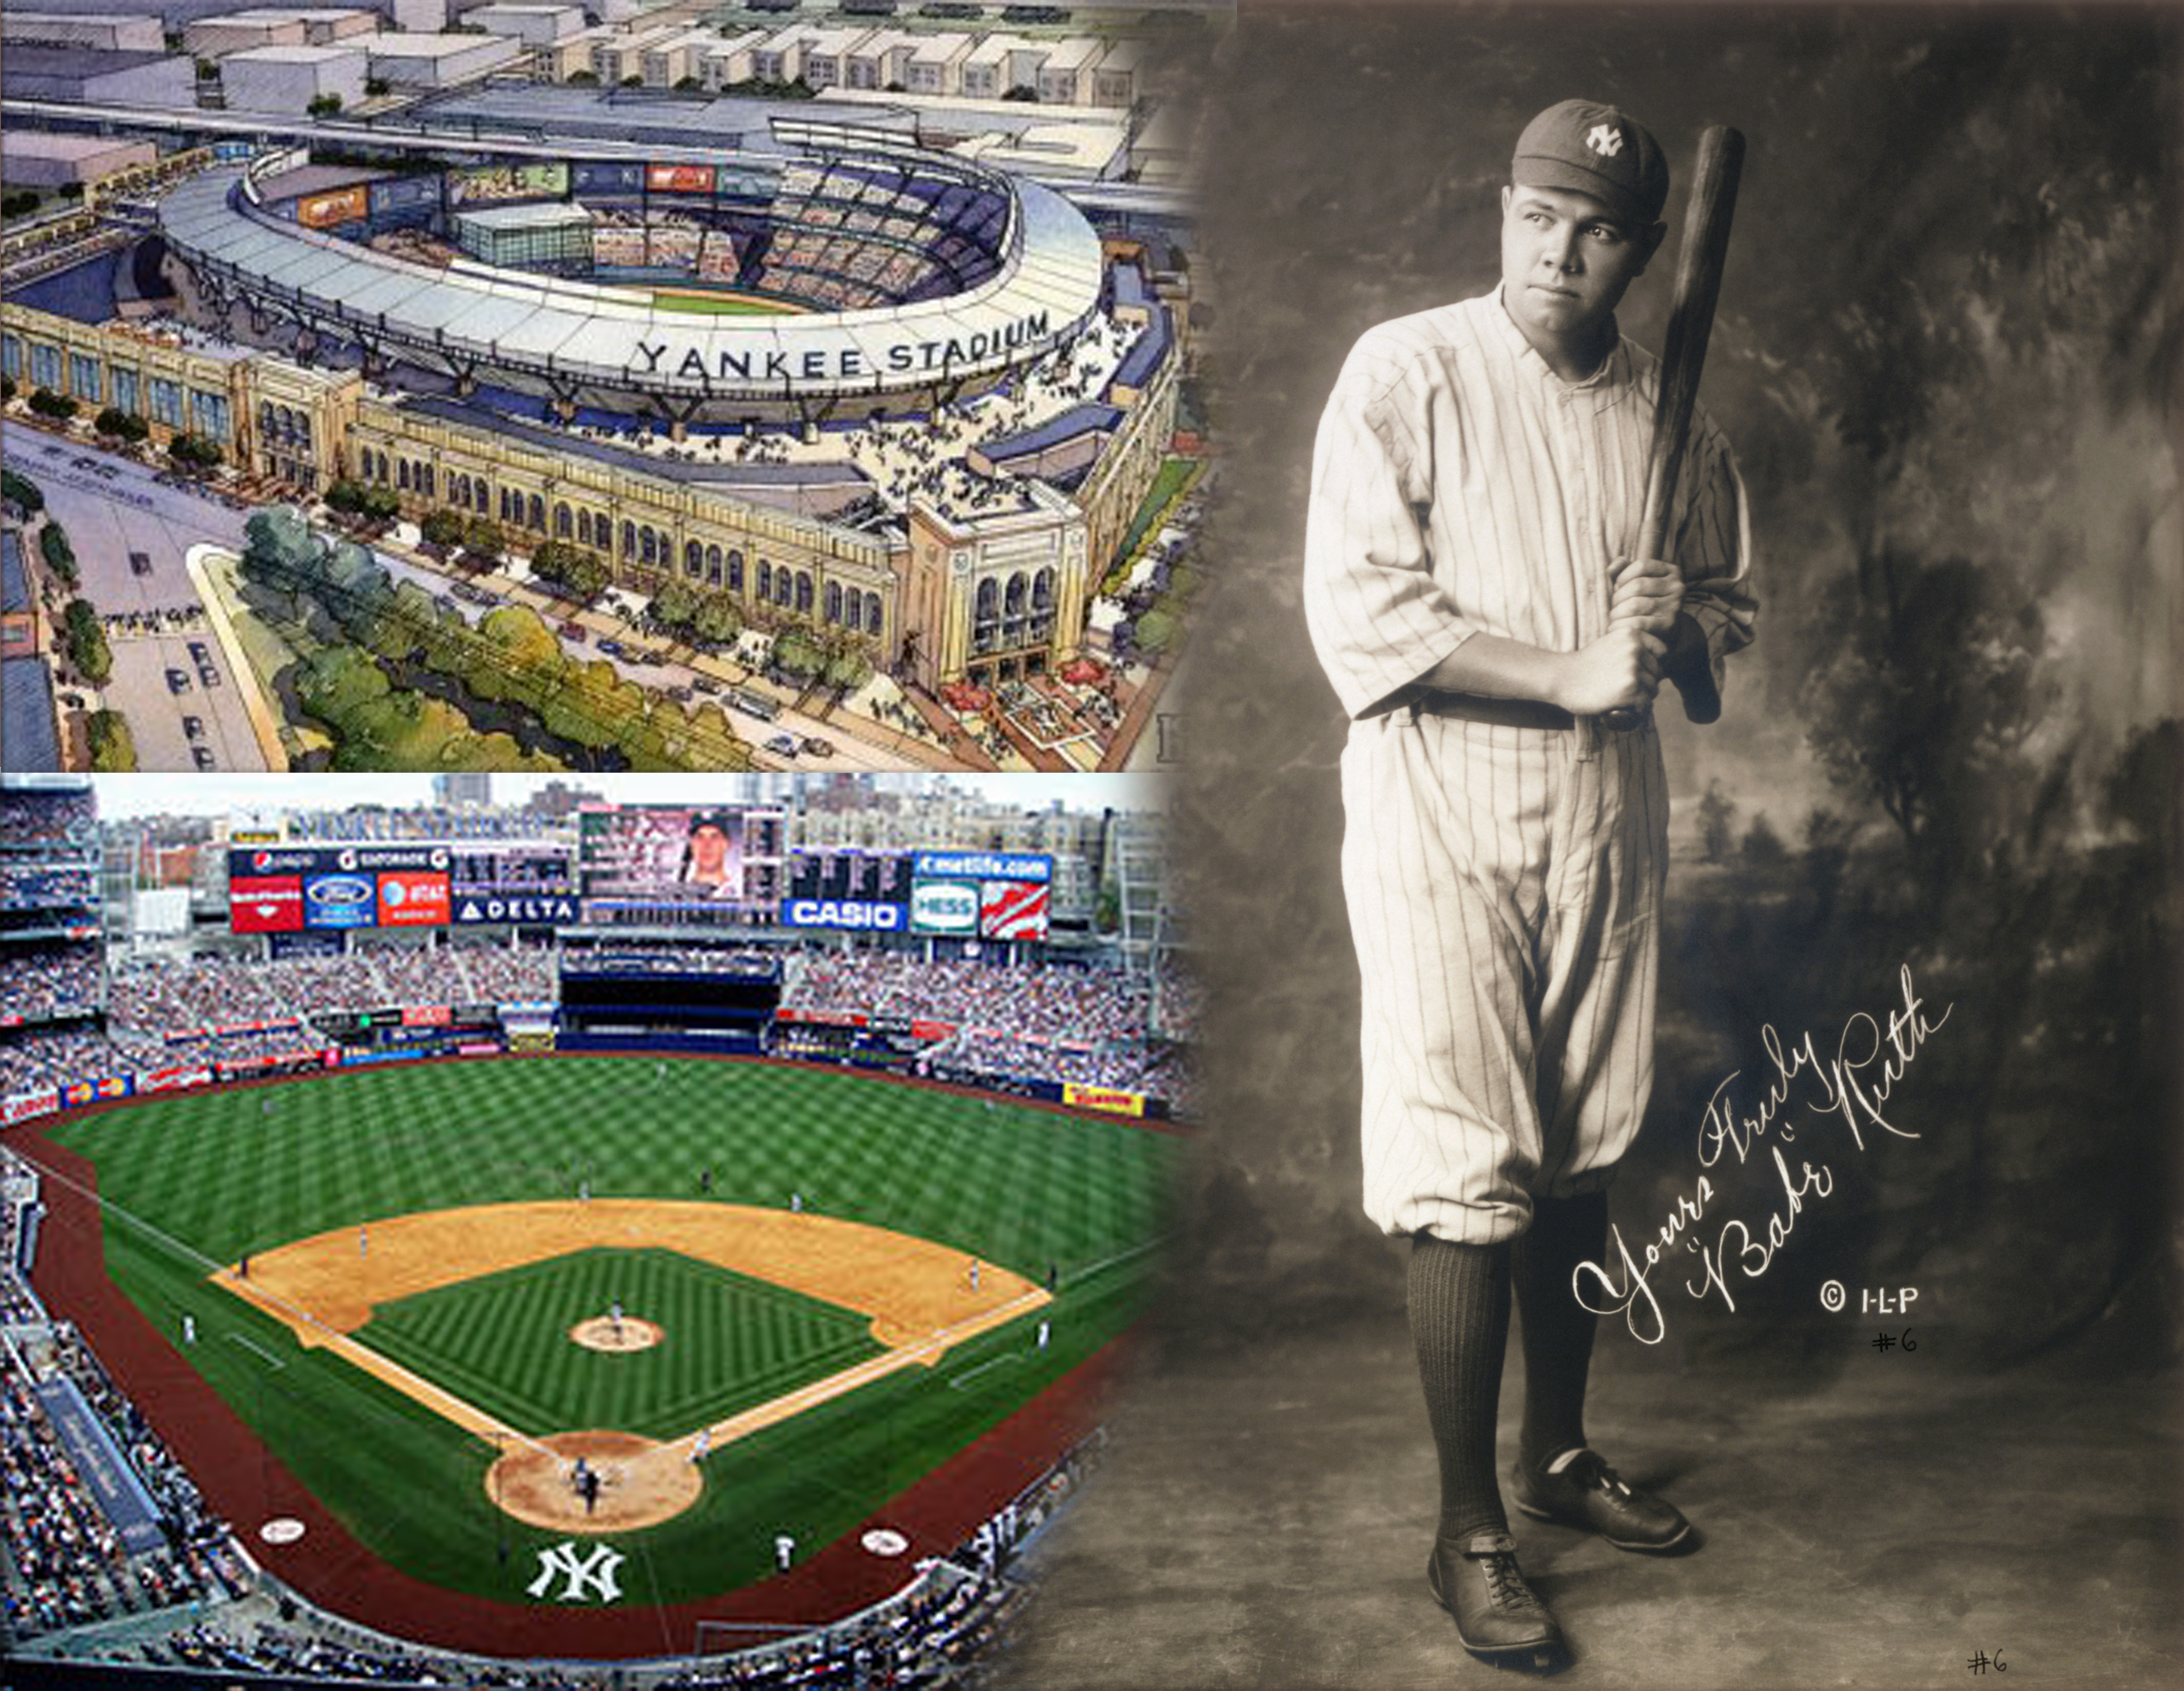 Yankee Stadium, 'The House that Ruth Built', opens on April 18th, 1923